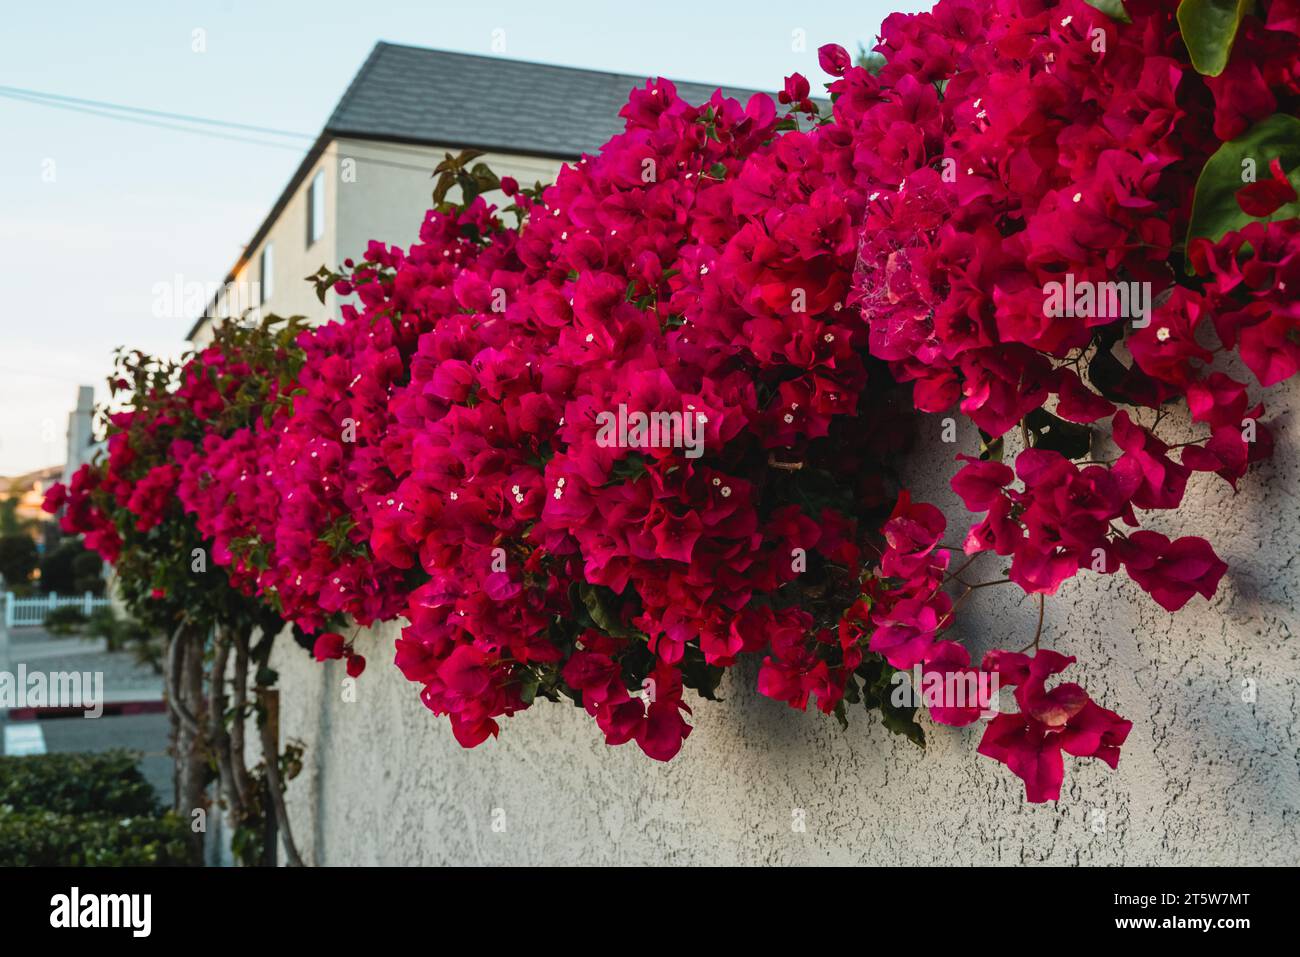 Bougainvillea vines cascade down a house wall. Colorful ornamental vines in full bloom close-up Stock Photo